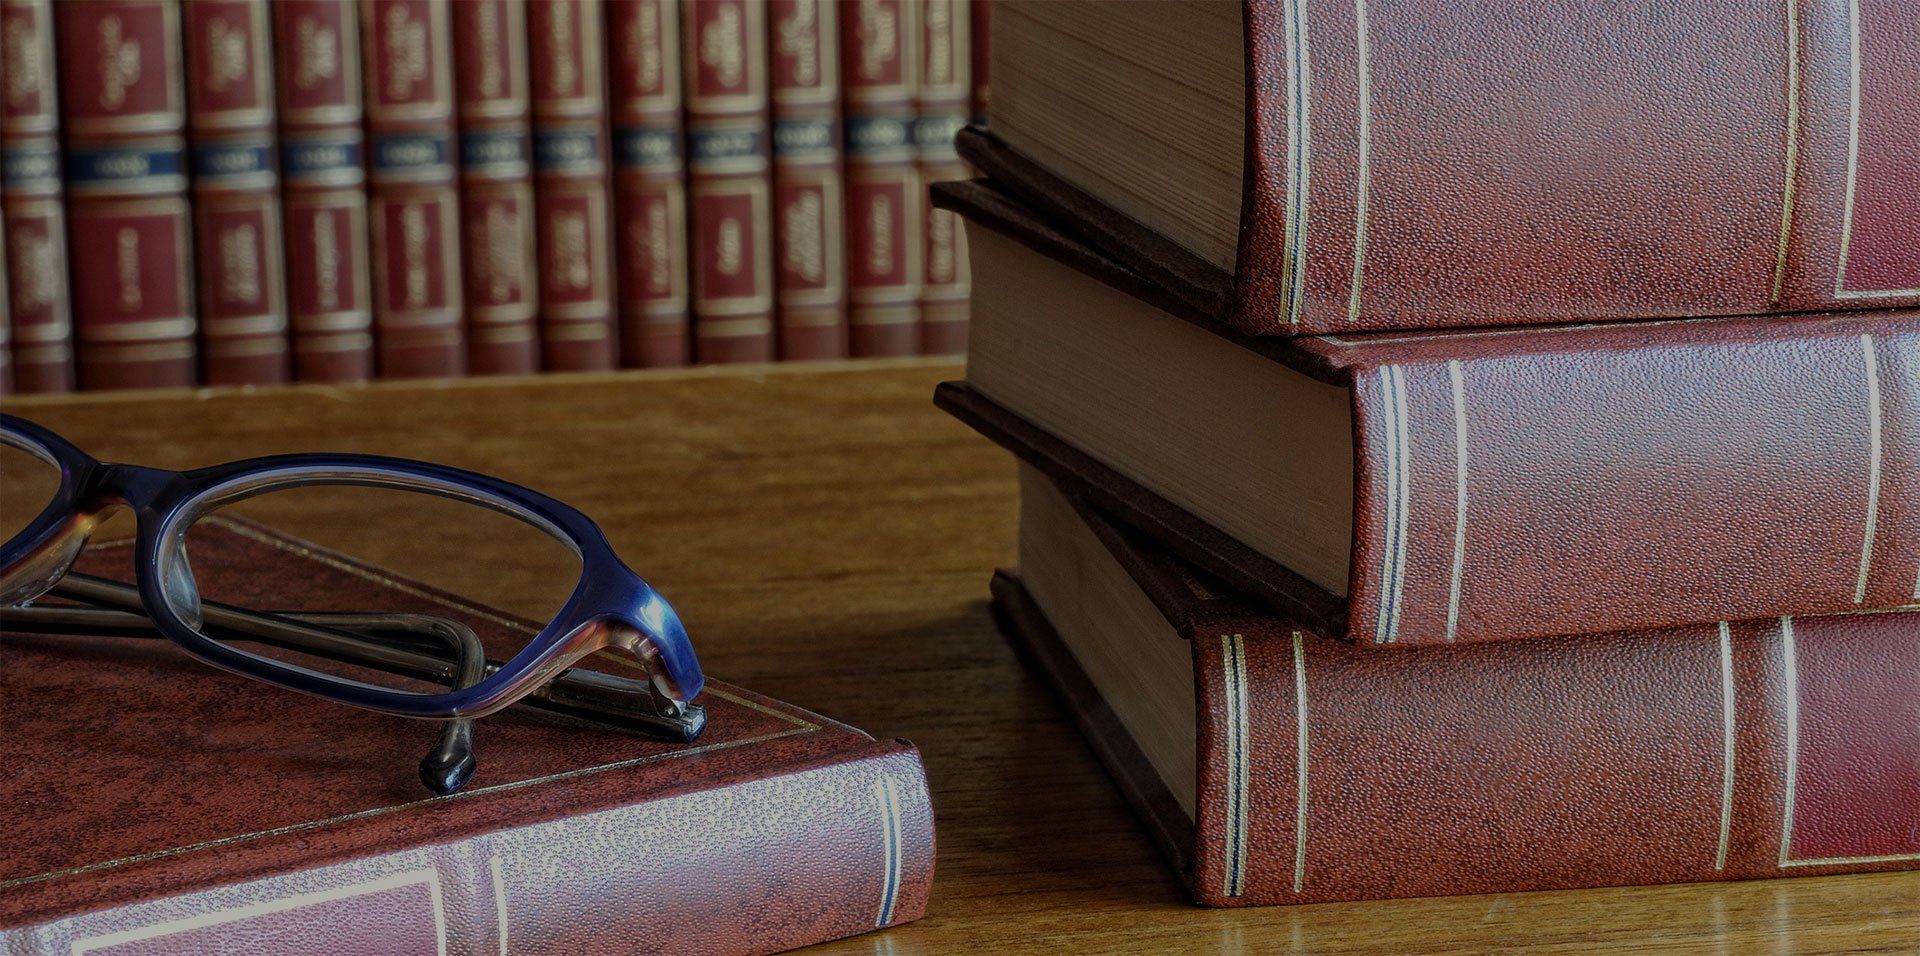 a pair of glasses sits on top of a stack of books